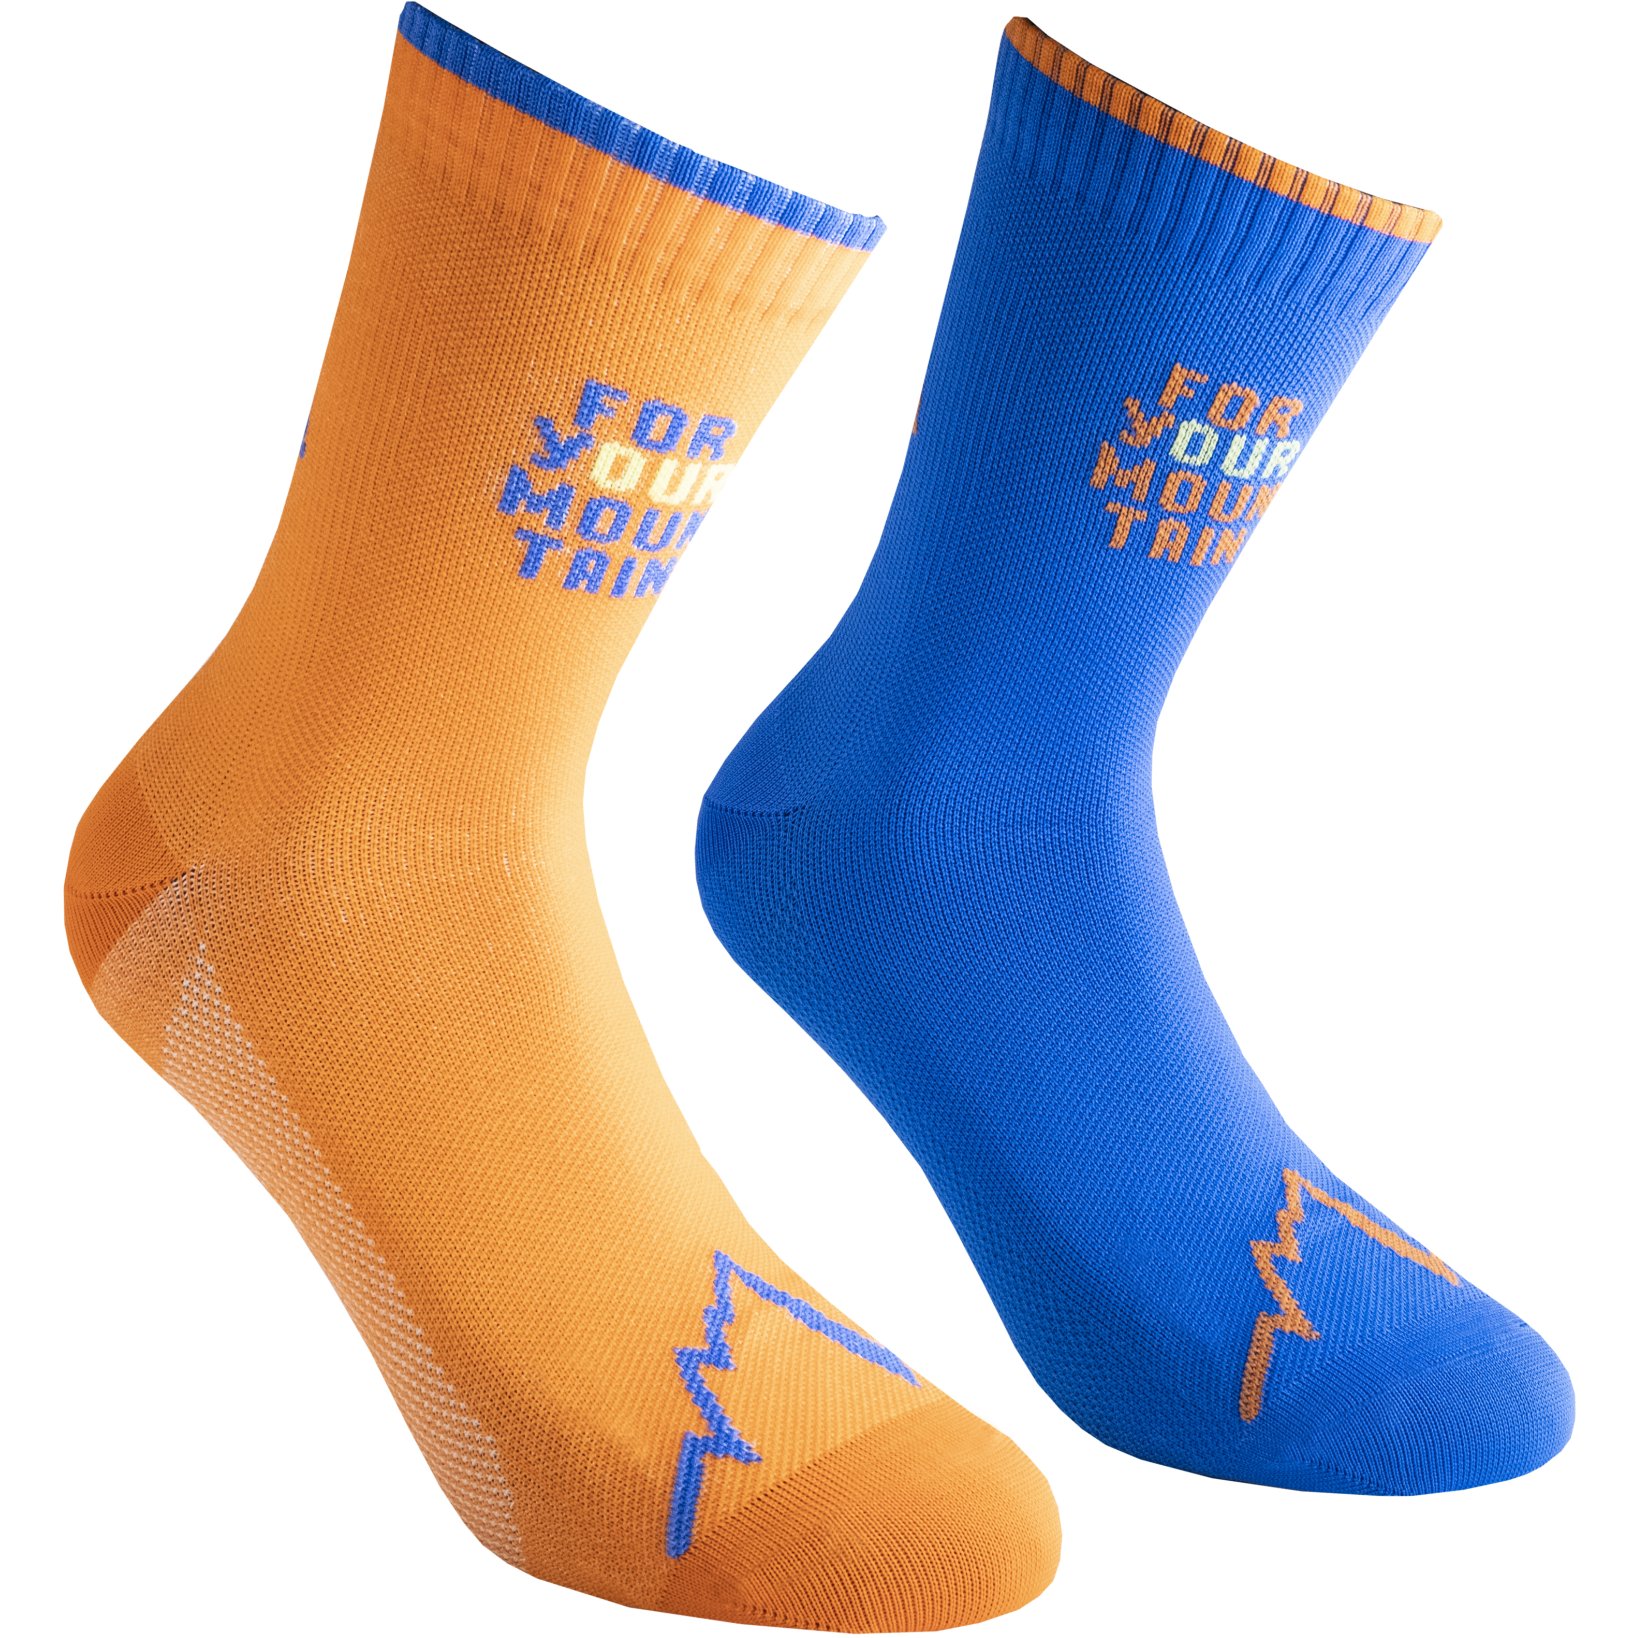 Picture of La Sportiva For Your Mountain Socks - Electric Blue/Flame